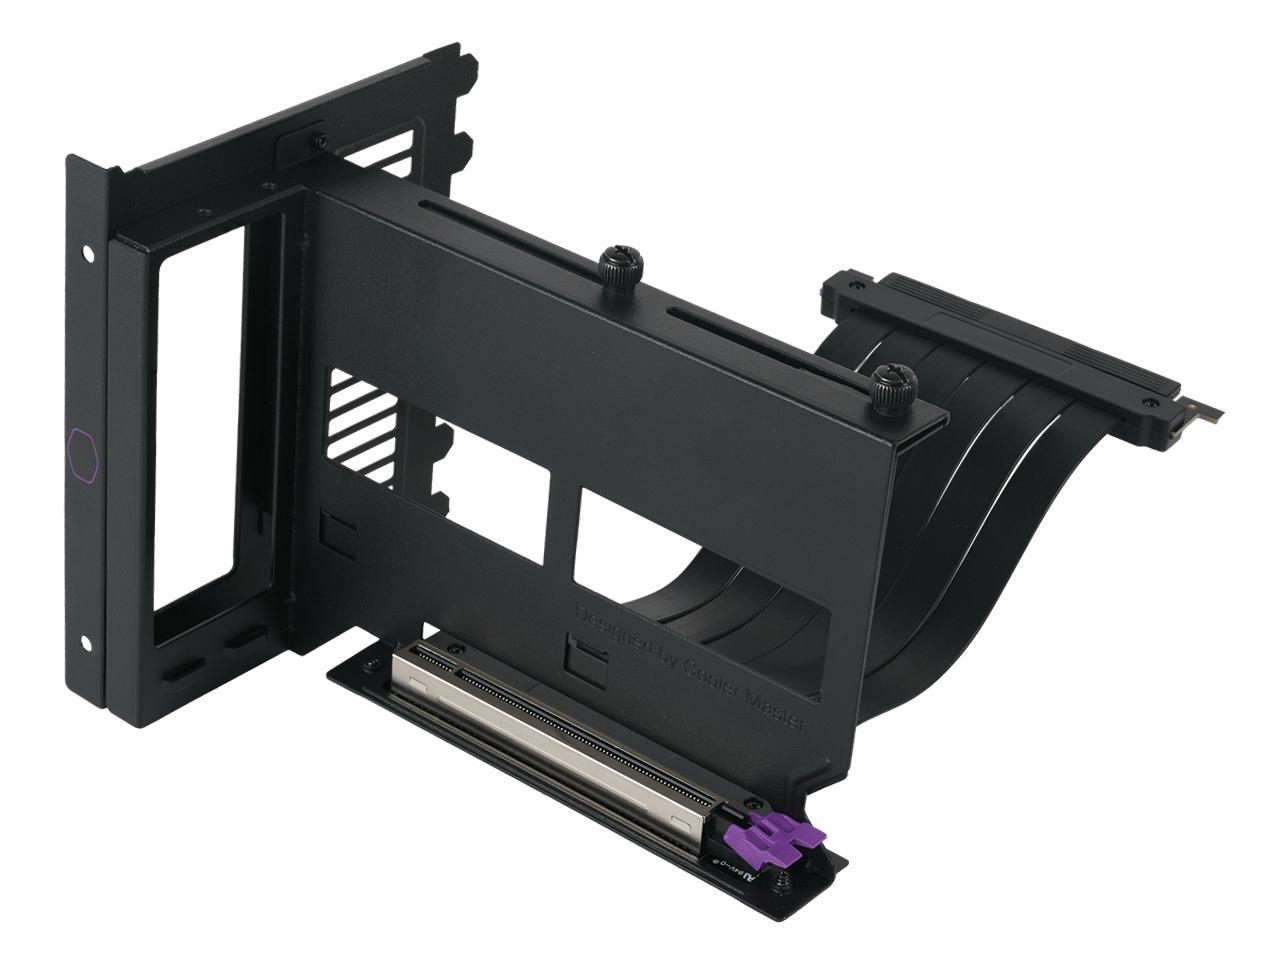 Cooler Master Accessory: Universal Vertical Graphics Card Holder Kit Ver.2 - For Full Tower / Standard ATX Chassis with at least 7 available PCI slots